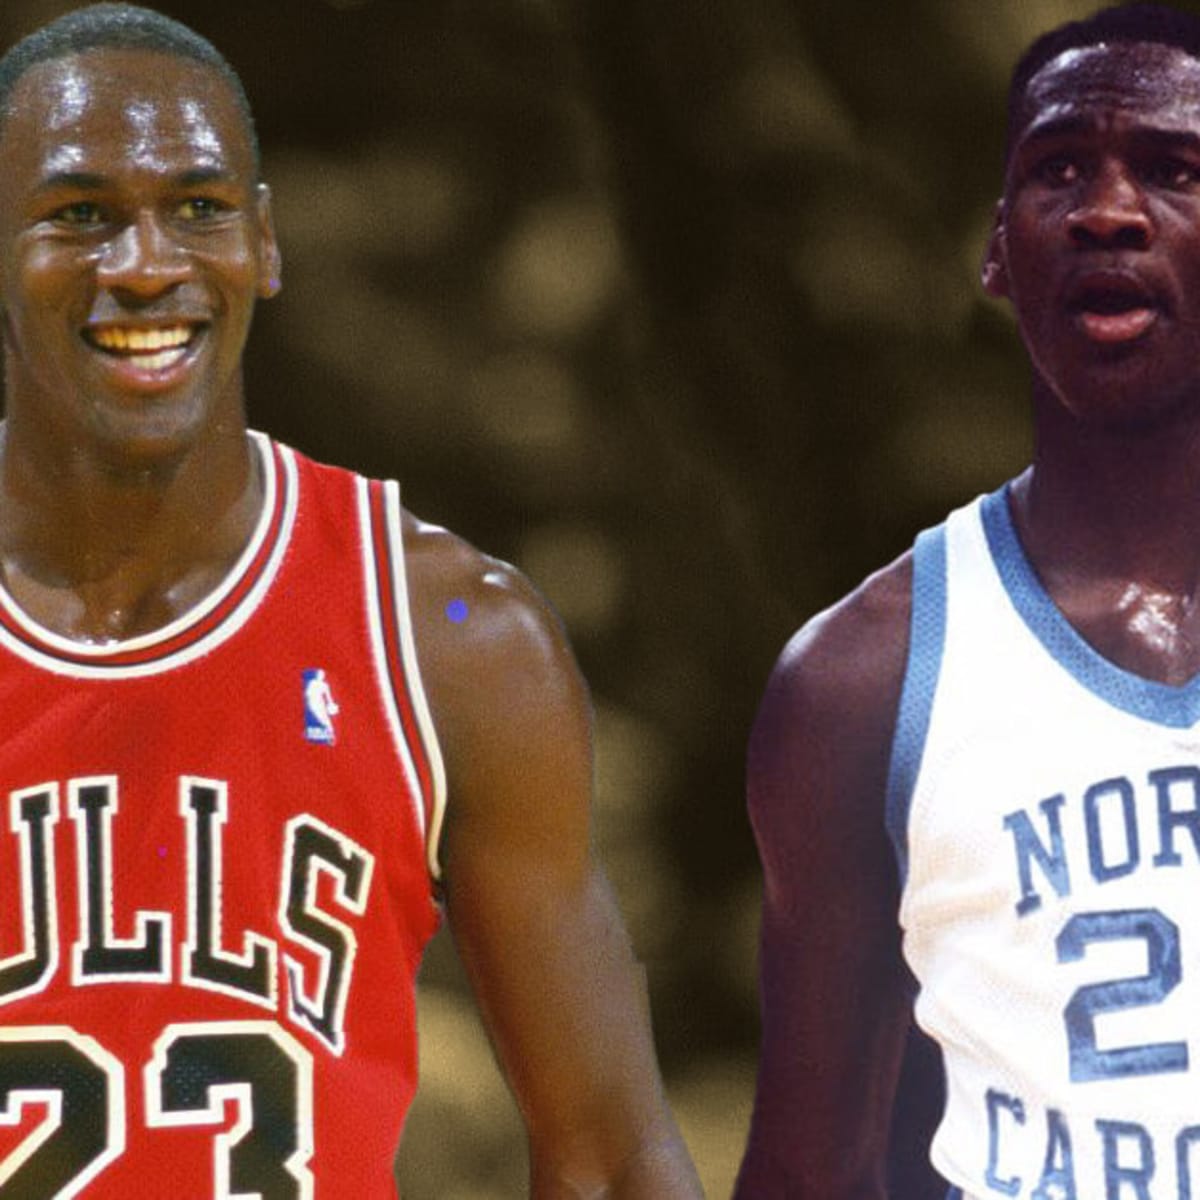 How did Michael Jordan fare in his rookie year statistically? All